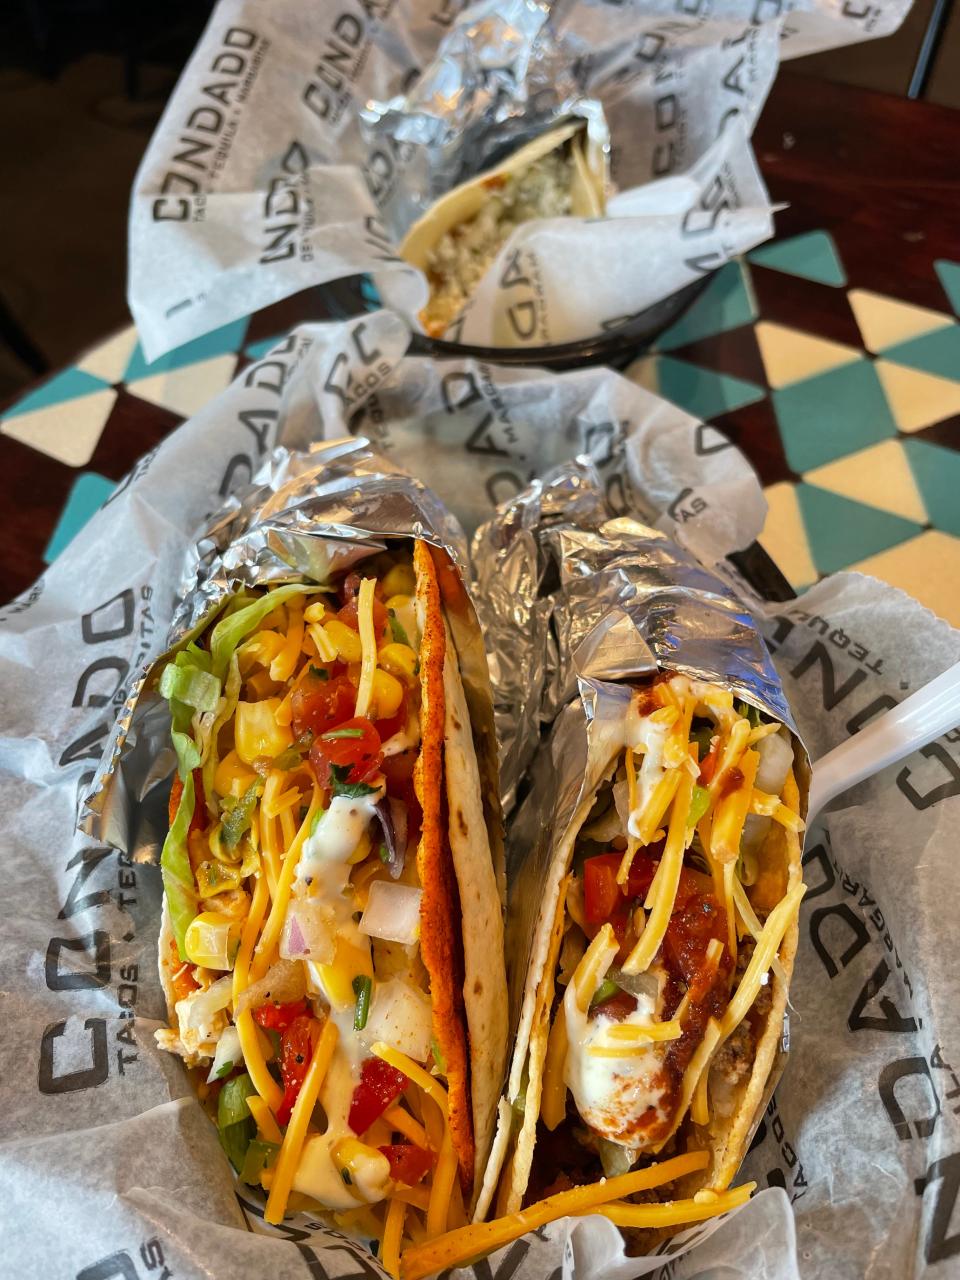 Flavorful tacos such as the Lucy’s Fire and Cali Green at Condado Tacos include chicken, lettuce, cilantro, onions, smoked cheddar, corn salsa and cilantro-lime aioli.